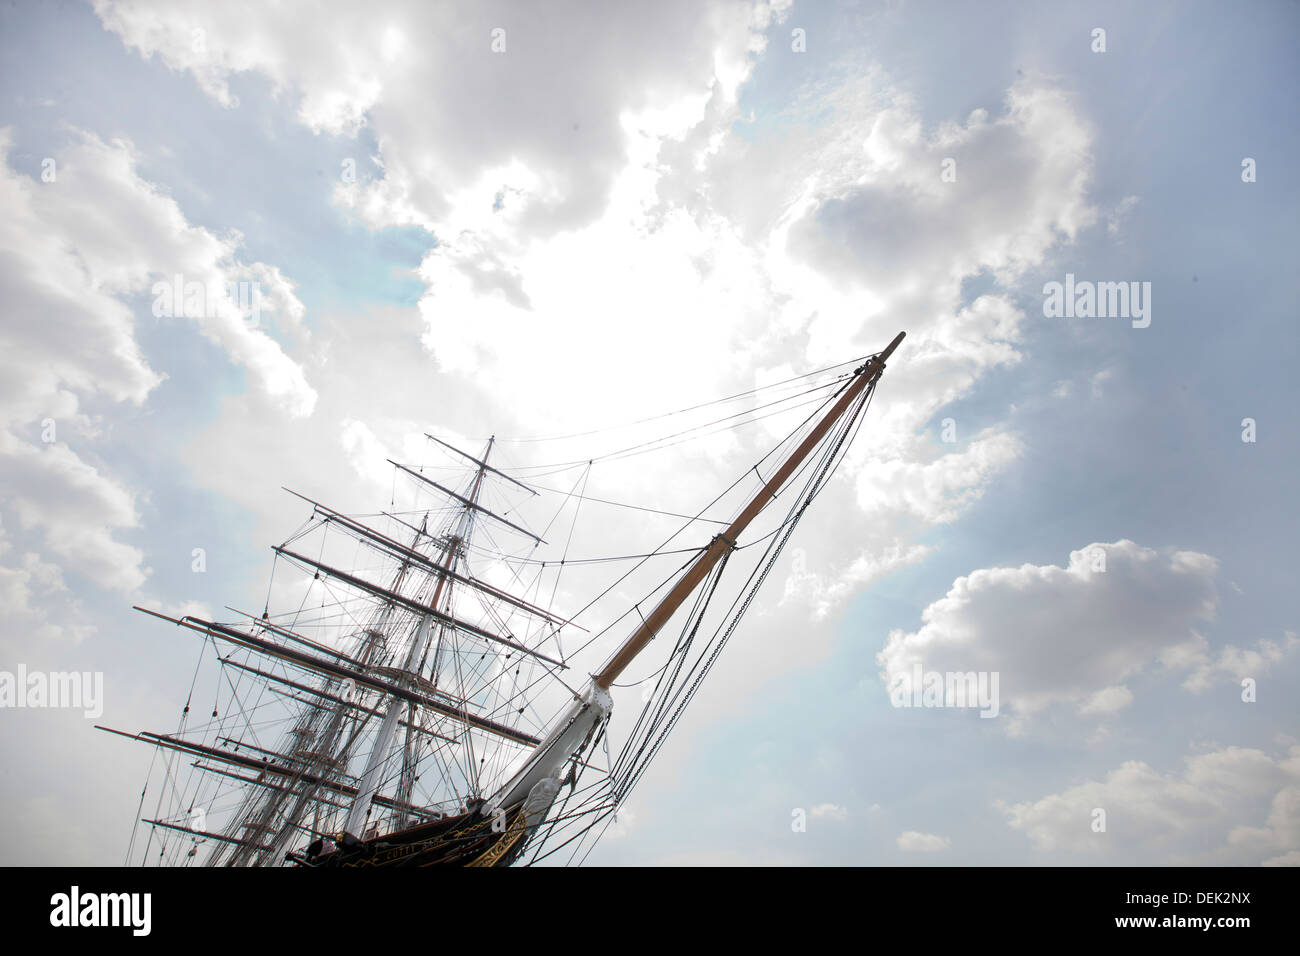 Low angle view three masted ship against cloudy sky Stock Photo